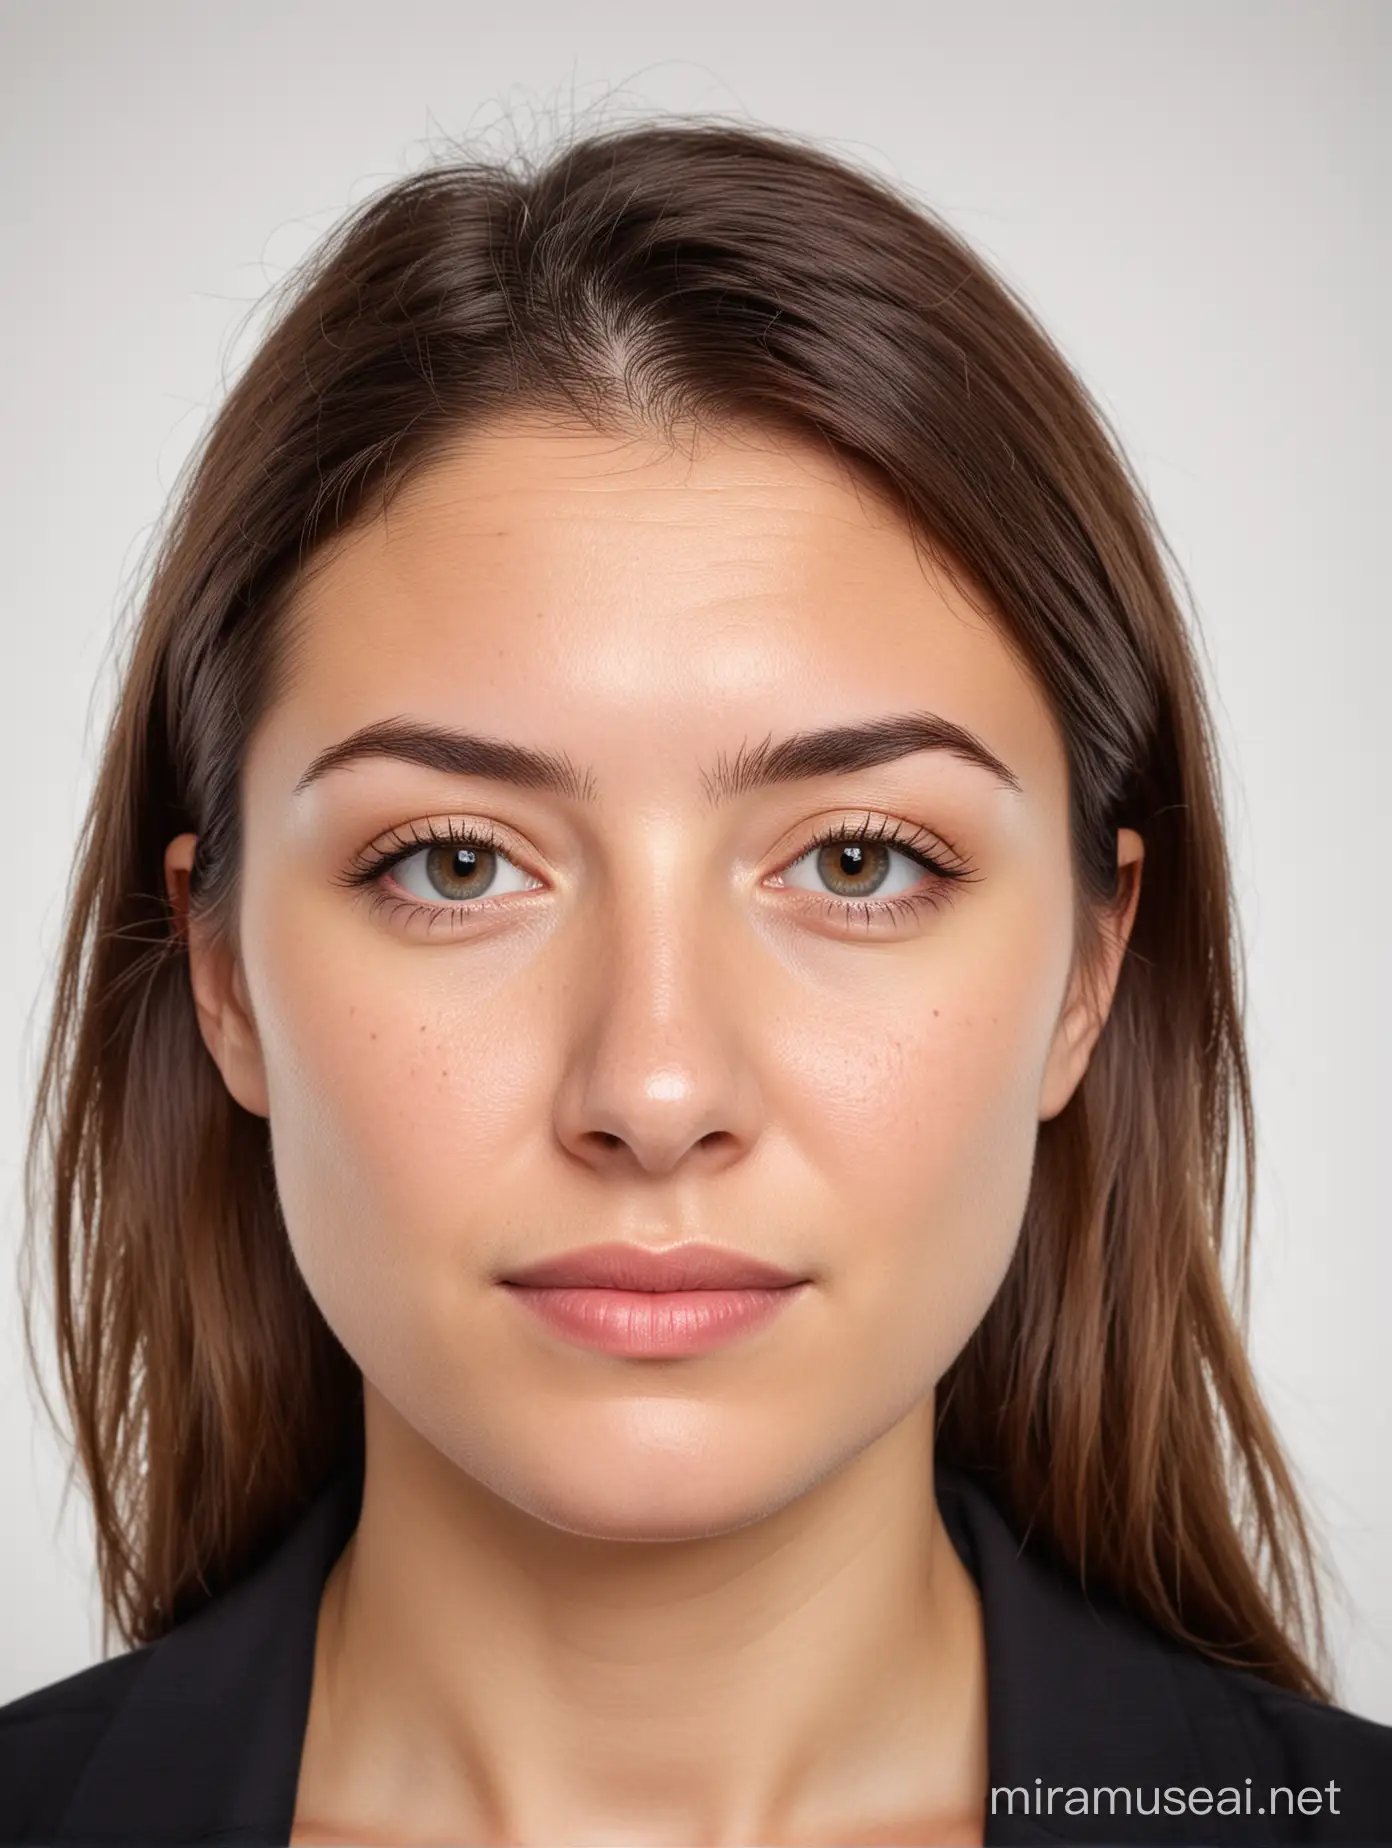 Professional Passport Photo of a Female on White Background